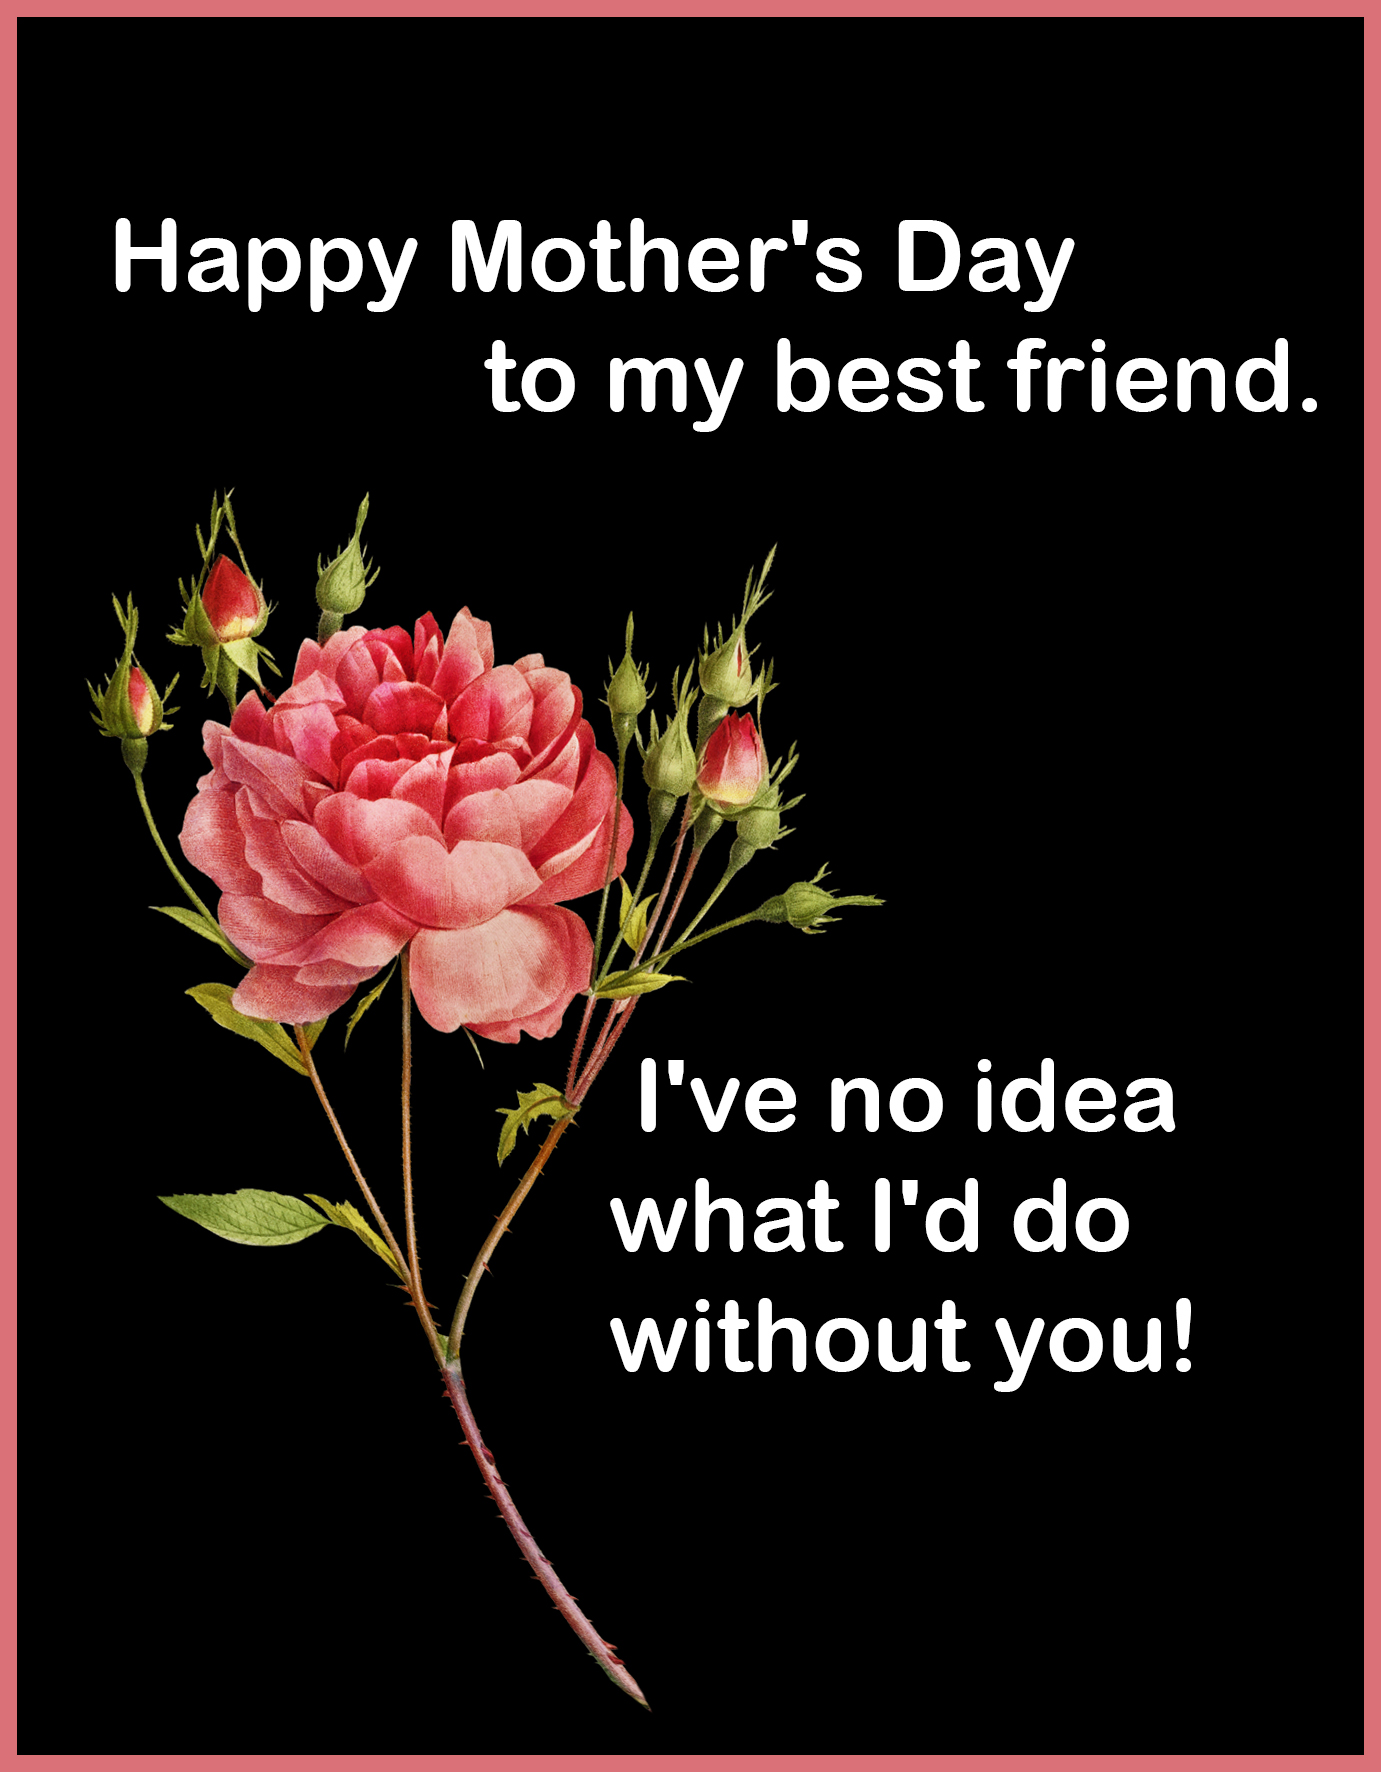 Happy Mother s Day My Friend Greetings